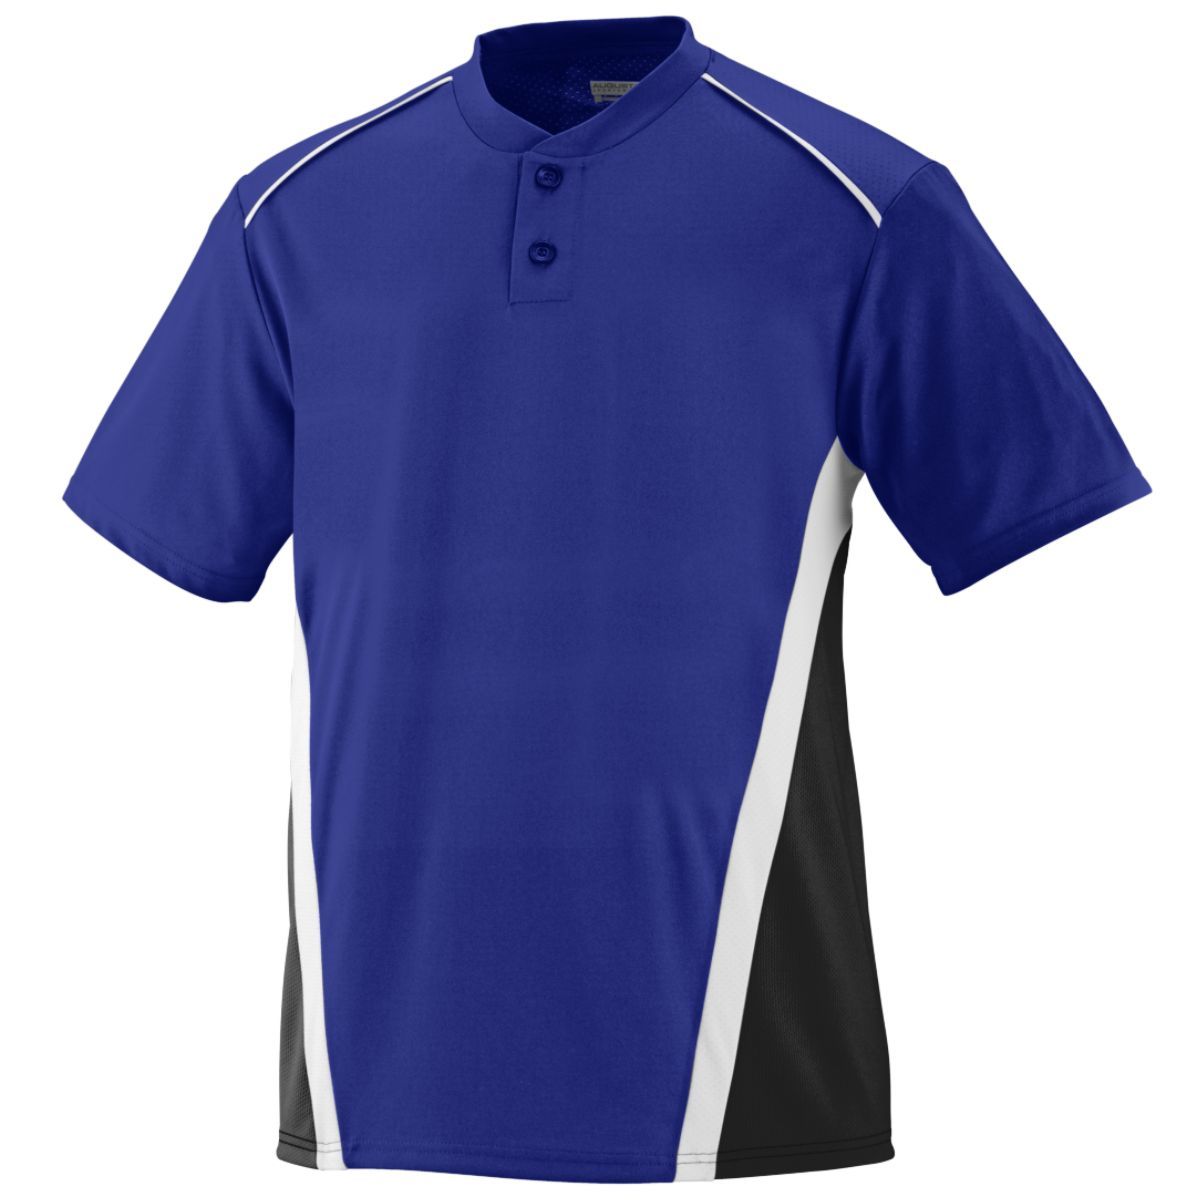 Augusta Sportswear Rbi Jersey in Purple/Black/White  -Part of the Adult, Adult-Jersey, Augusta-Products, Softball, Shirts product lines at KanaleyCreations.com